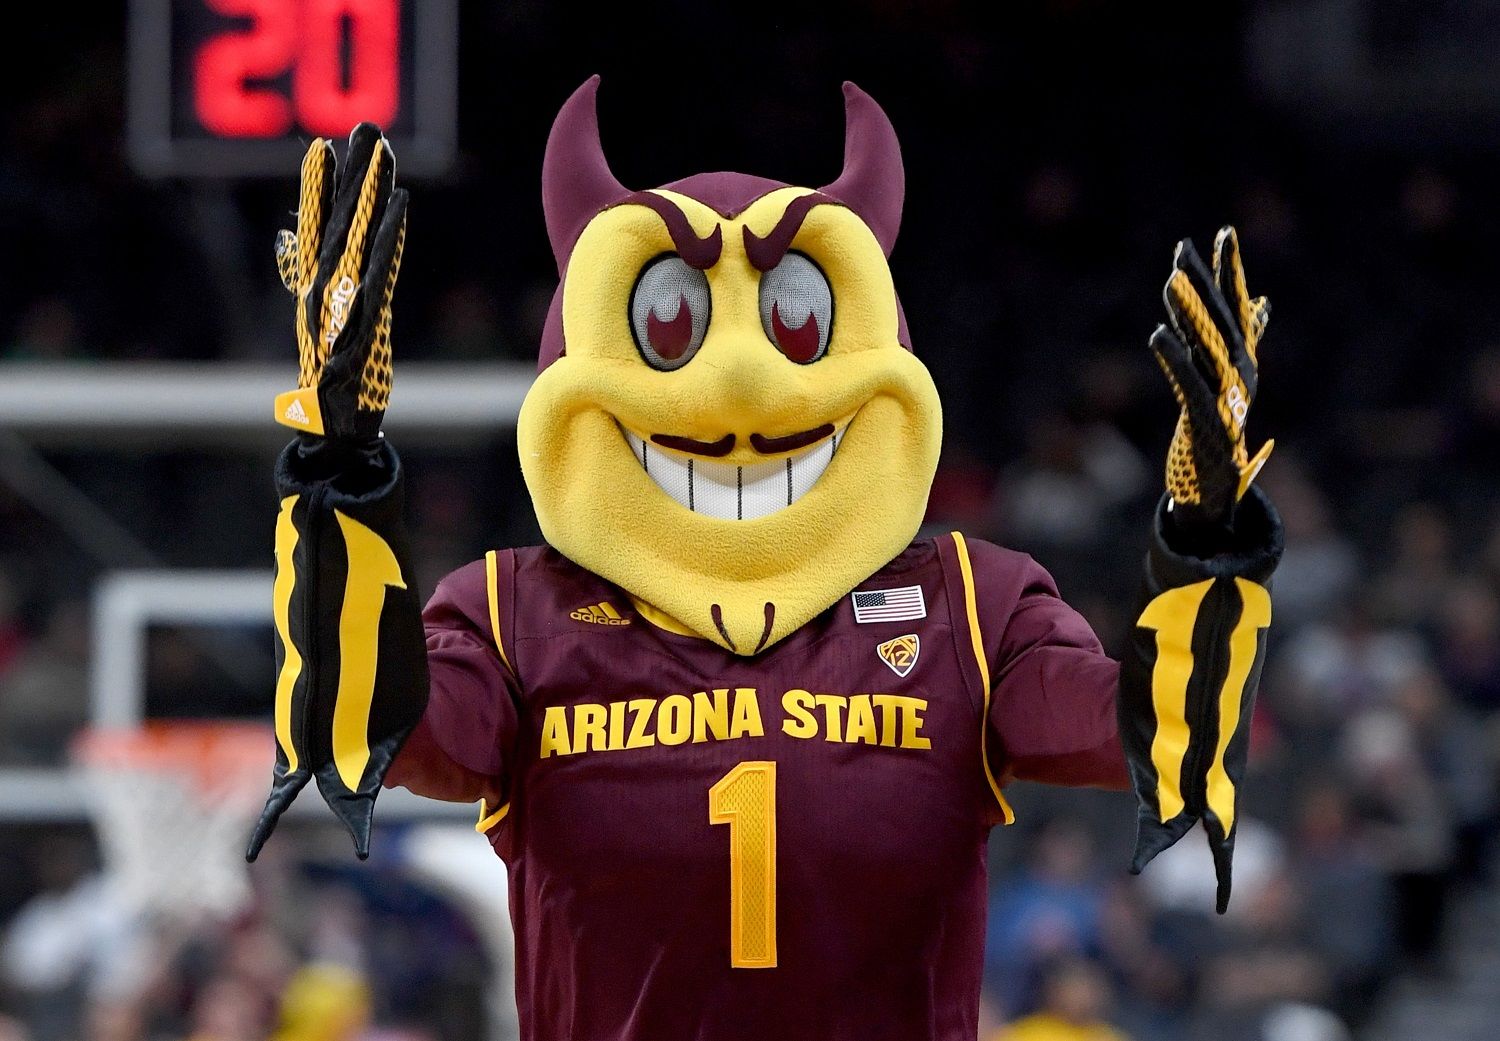 LAS VEGAS, NV - MARCH 07:  Arizona State Sun Devils mascot Sparky the Sun Devil stands on the court during the team's first-round game of the Pac-12 basketball tournament against the Colorado Buffaloes at T-Mobile Arena on March 7, 2018 in Las Vegas, Nevada. The Buffaloes won 97-85.  (Photo by Ethan Miller/Getty Images)